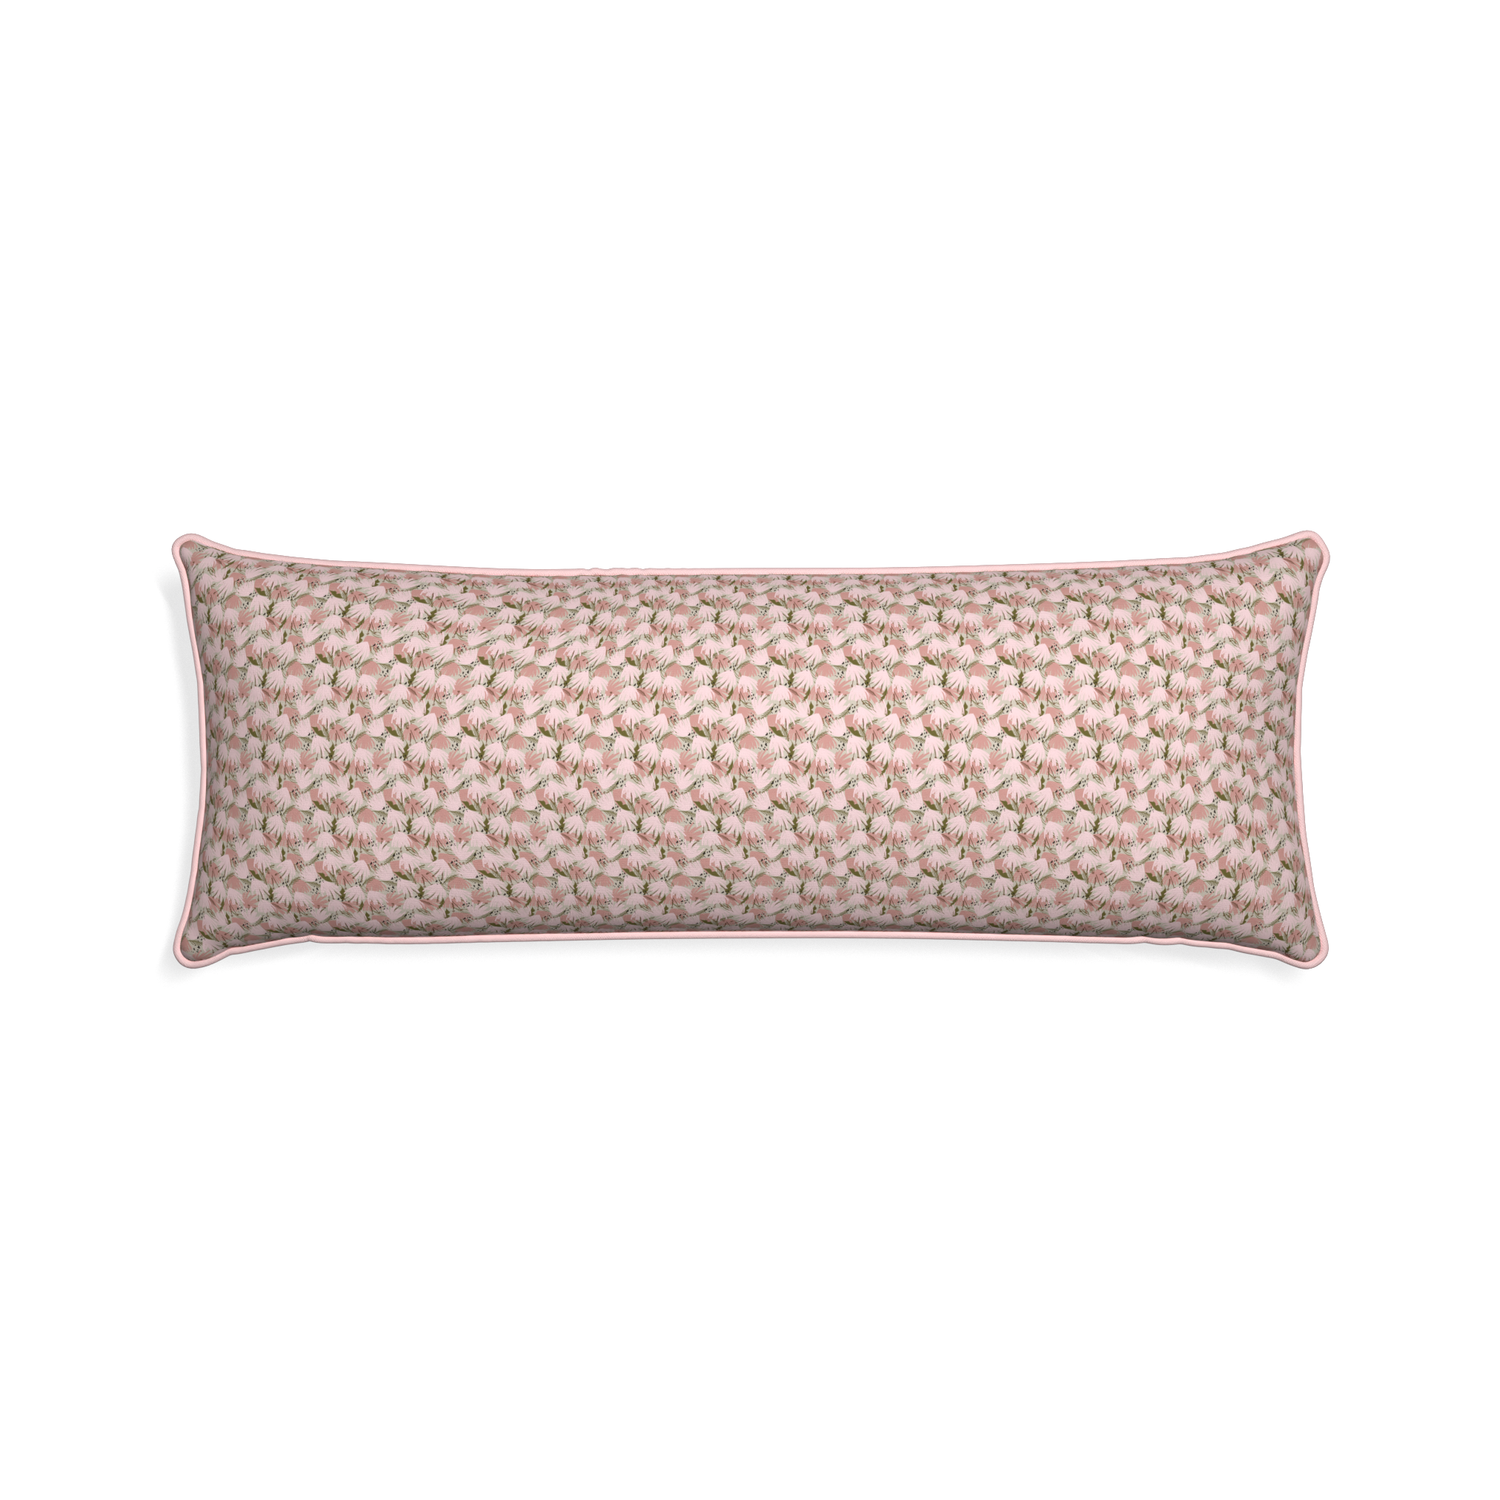 Xl-lumbar eden pink custom pink floralpillow with petal piping on white background